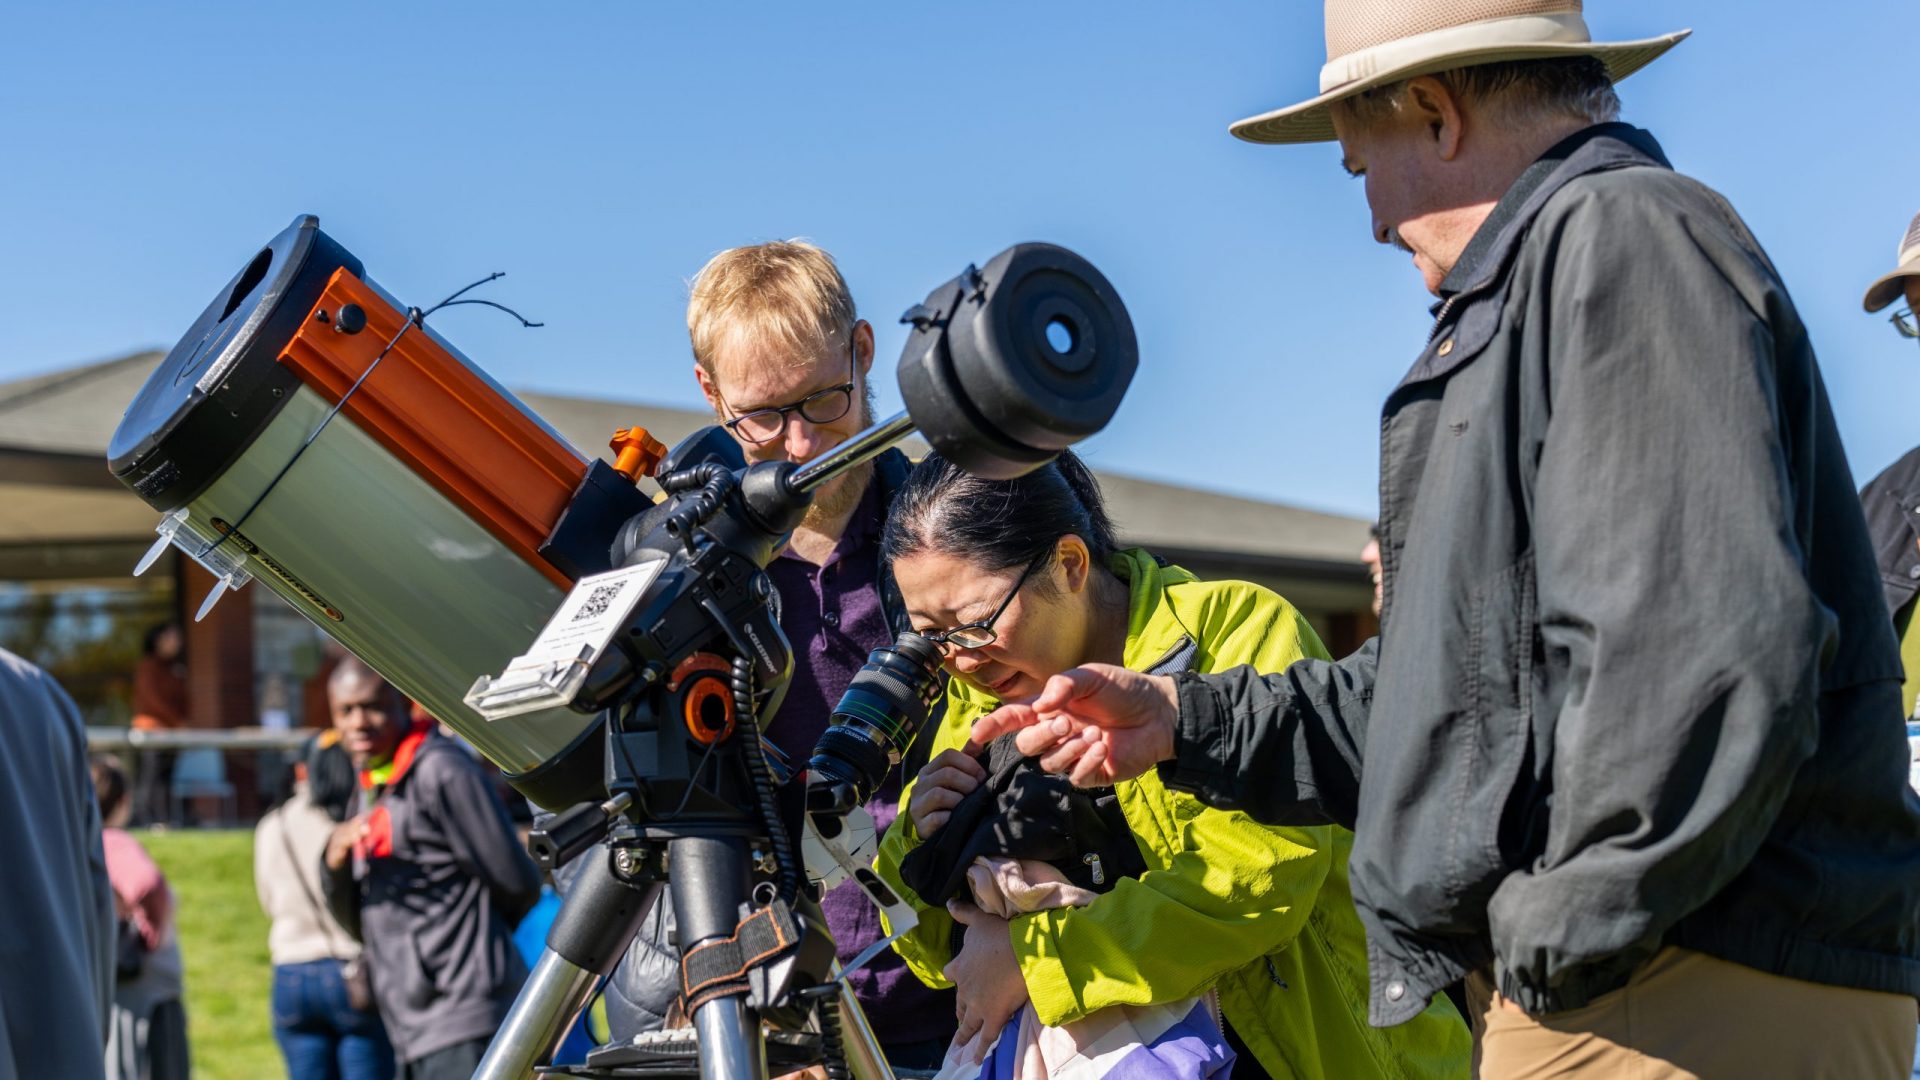 A woman with eyeglasses uses a telescope with sun filter, while a man with a hat gives her instructions on how to identify sunspots.